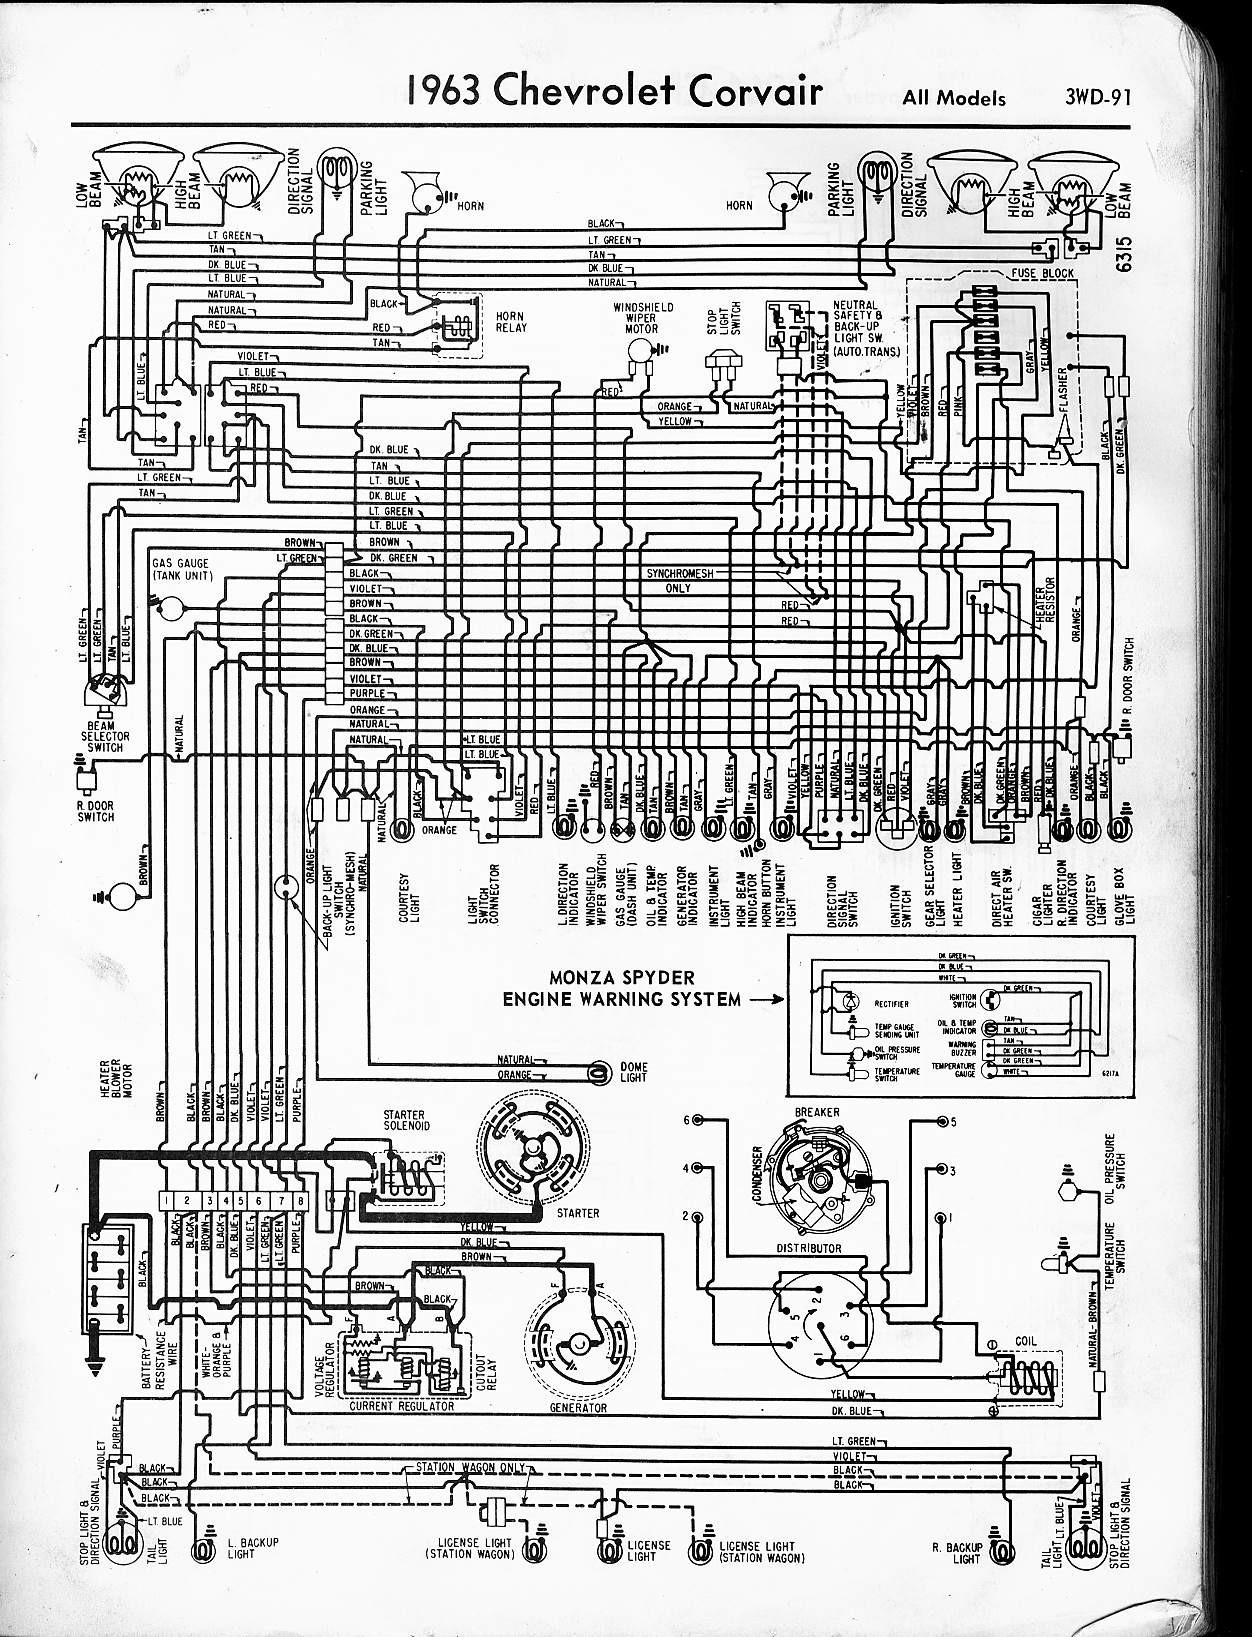 Wiring Diagram for Chevy Starter Motor Fresh 57 65 Chevy Wiring Diagrams